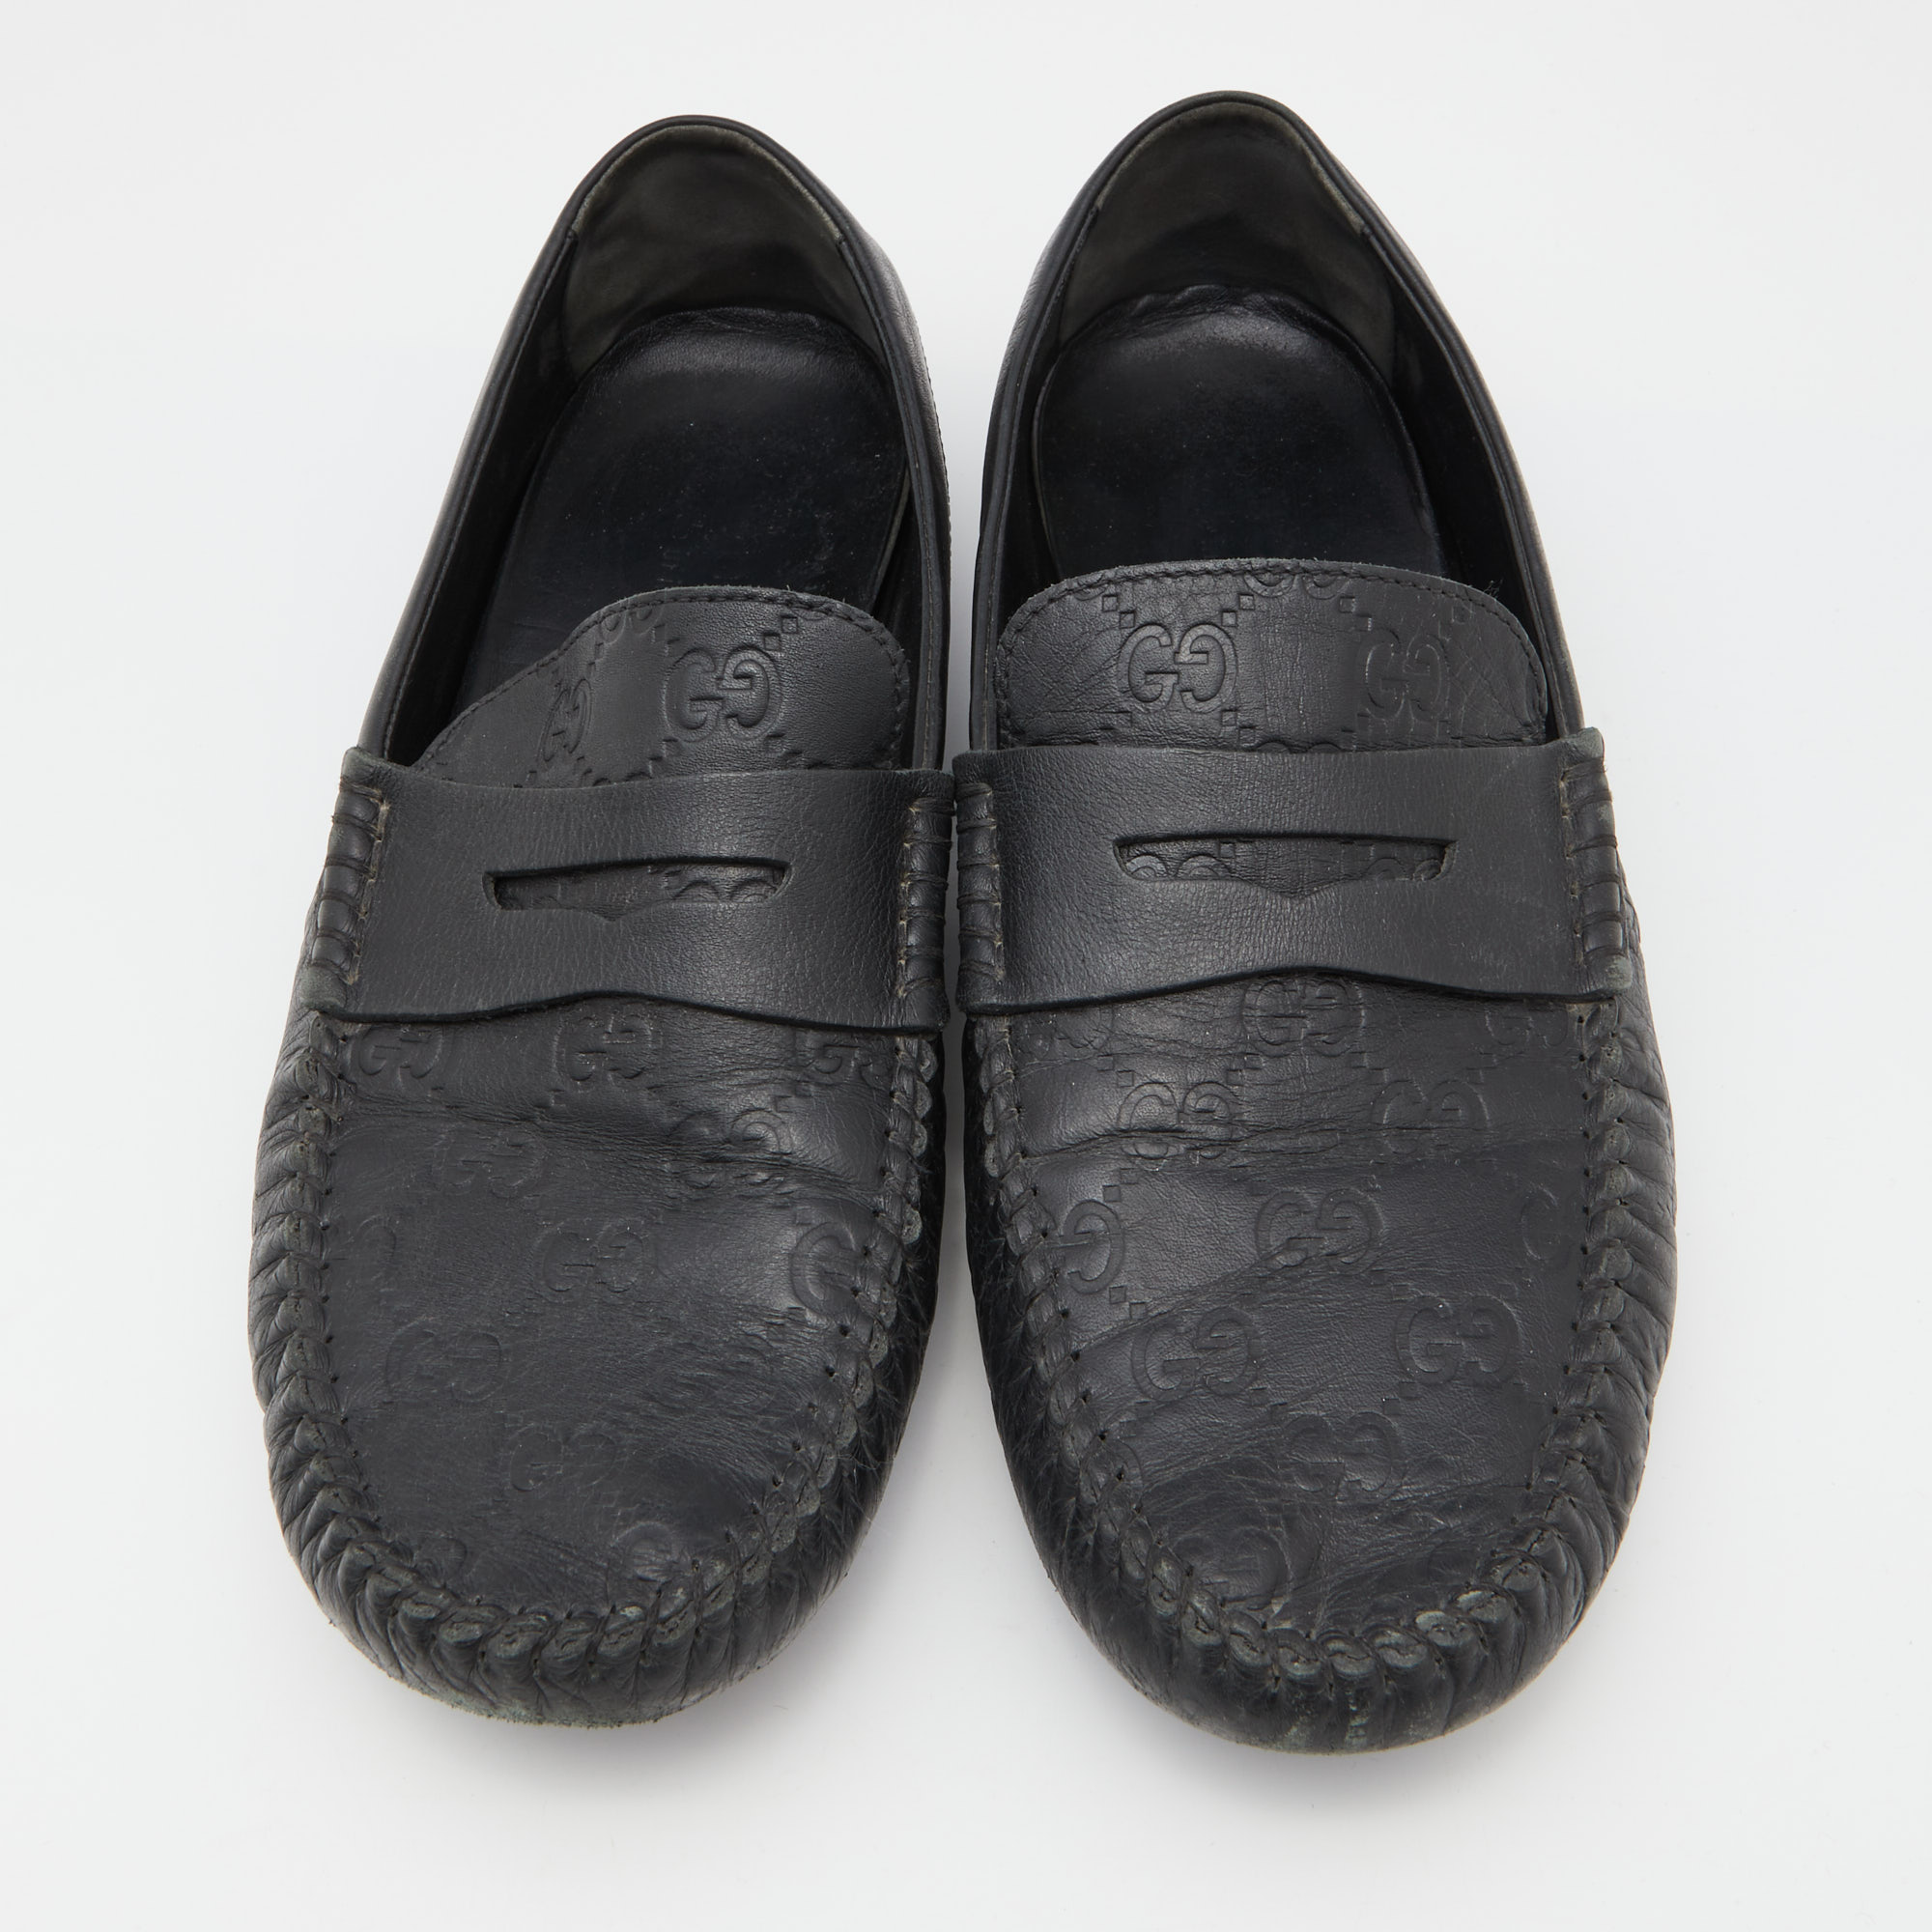 Gucci Guccissima Leather Penny Slip On Loafers Size 40.5